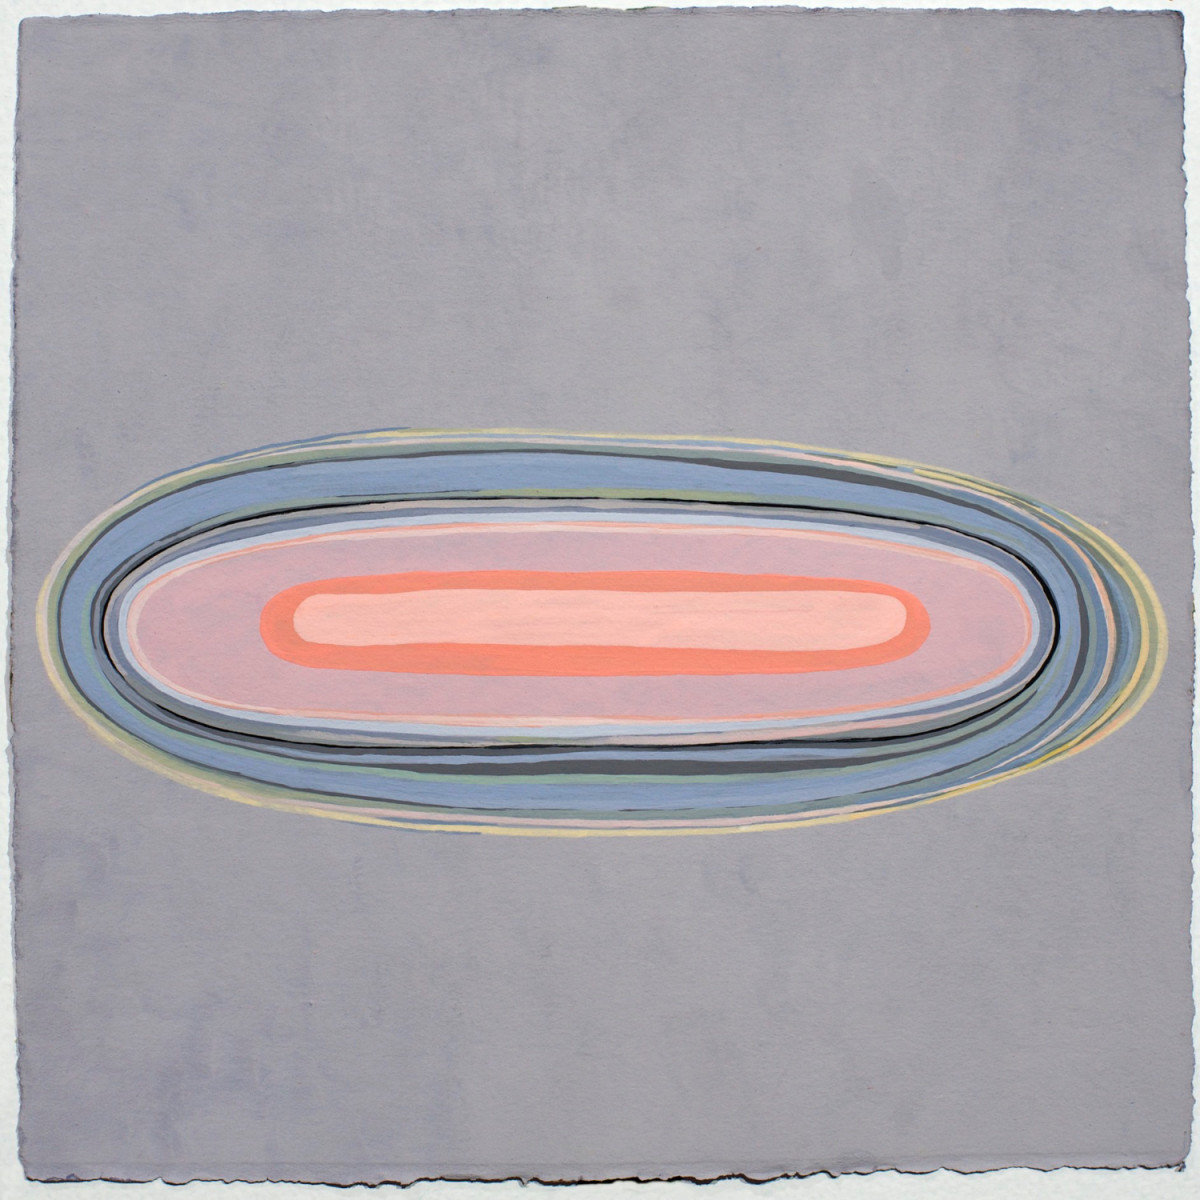 Tantra #21, (Pink Ovoid on Grey) by Linda Price-Sneddon 